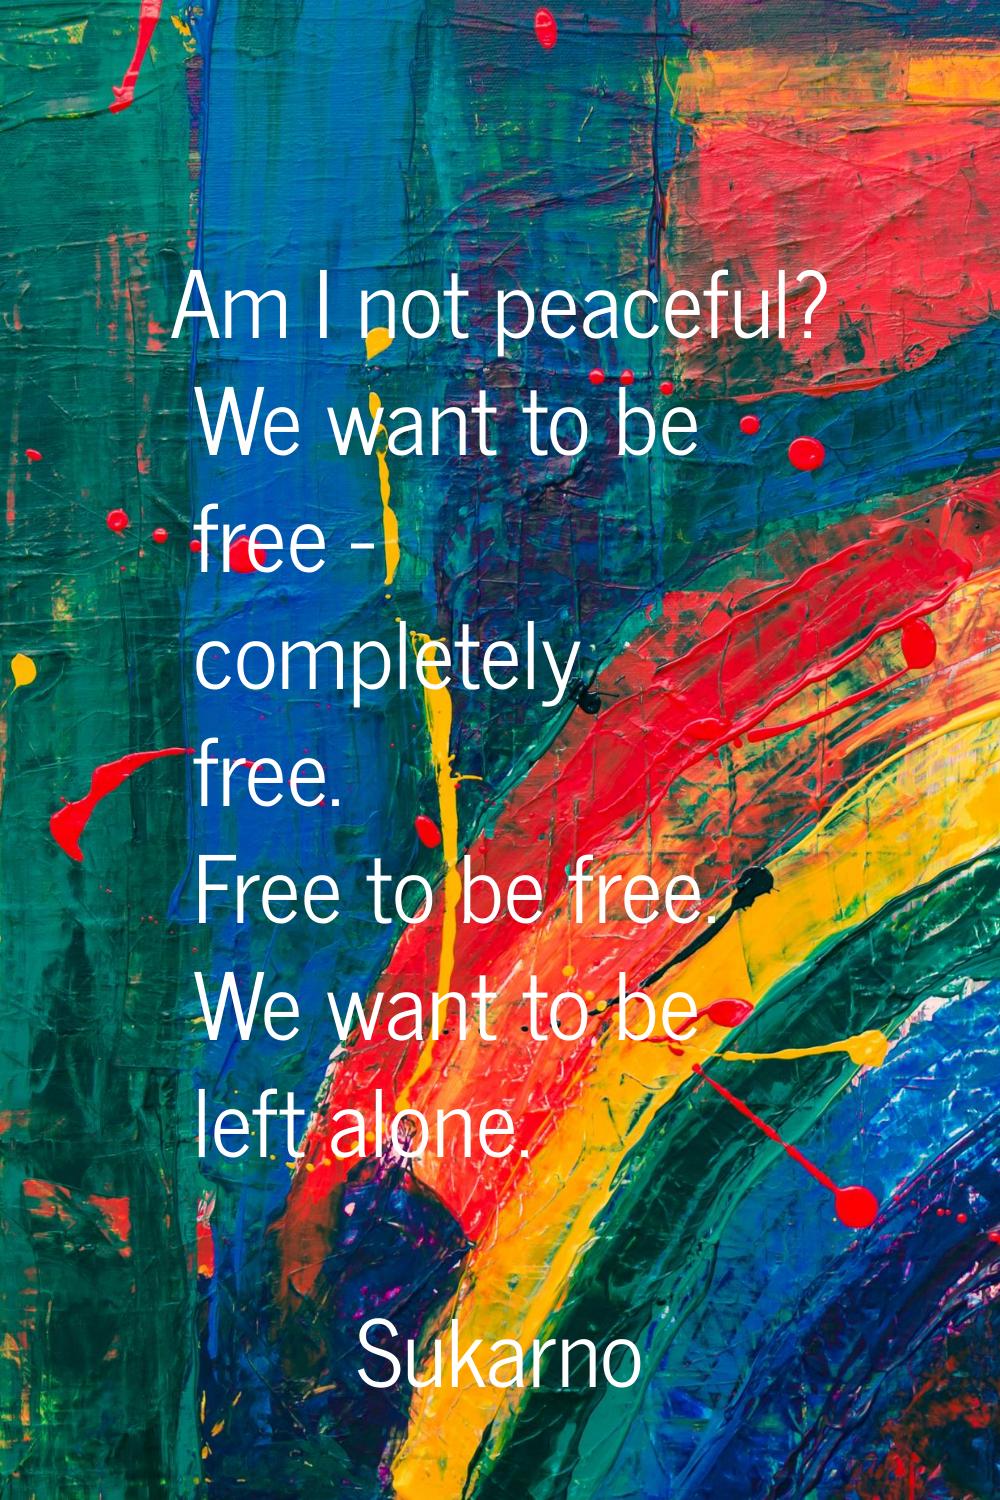 Am I not peaceful? We want to be free - completely free. Free to be free. We want to be left alone.